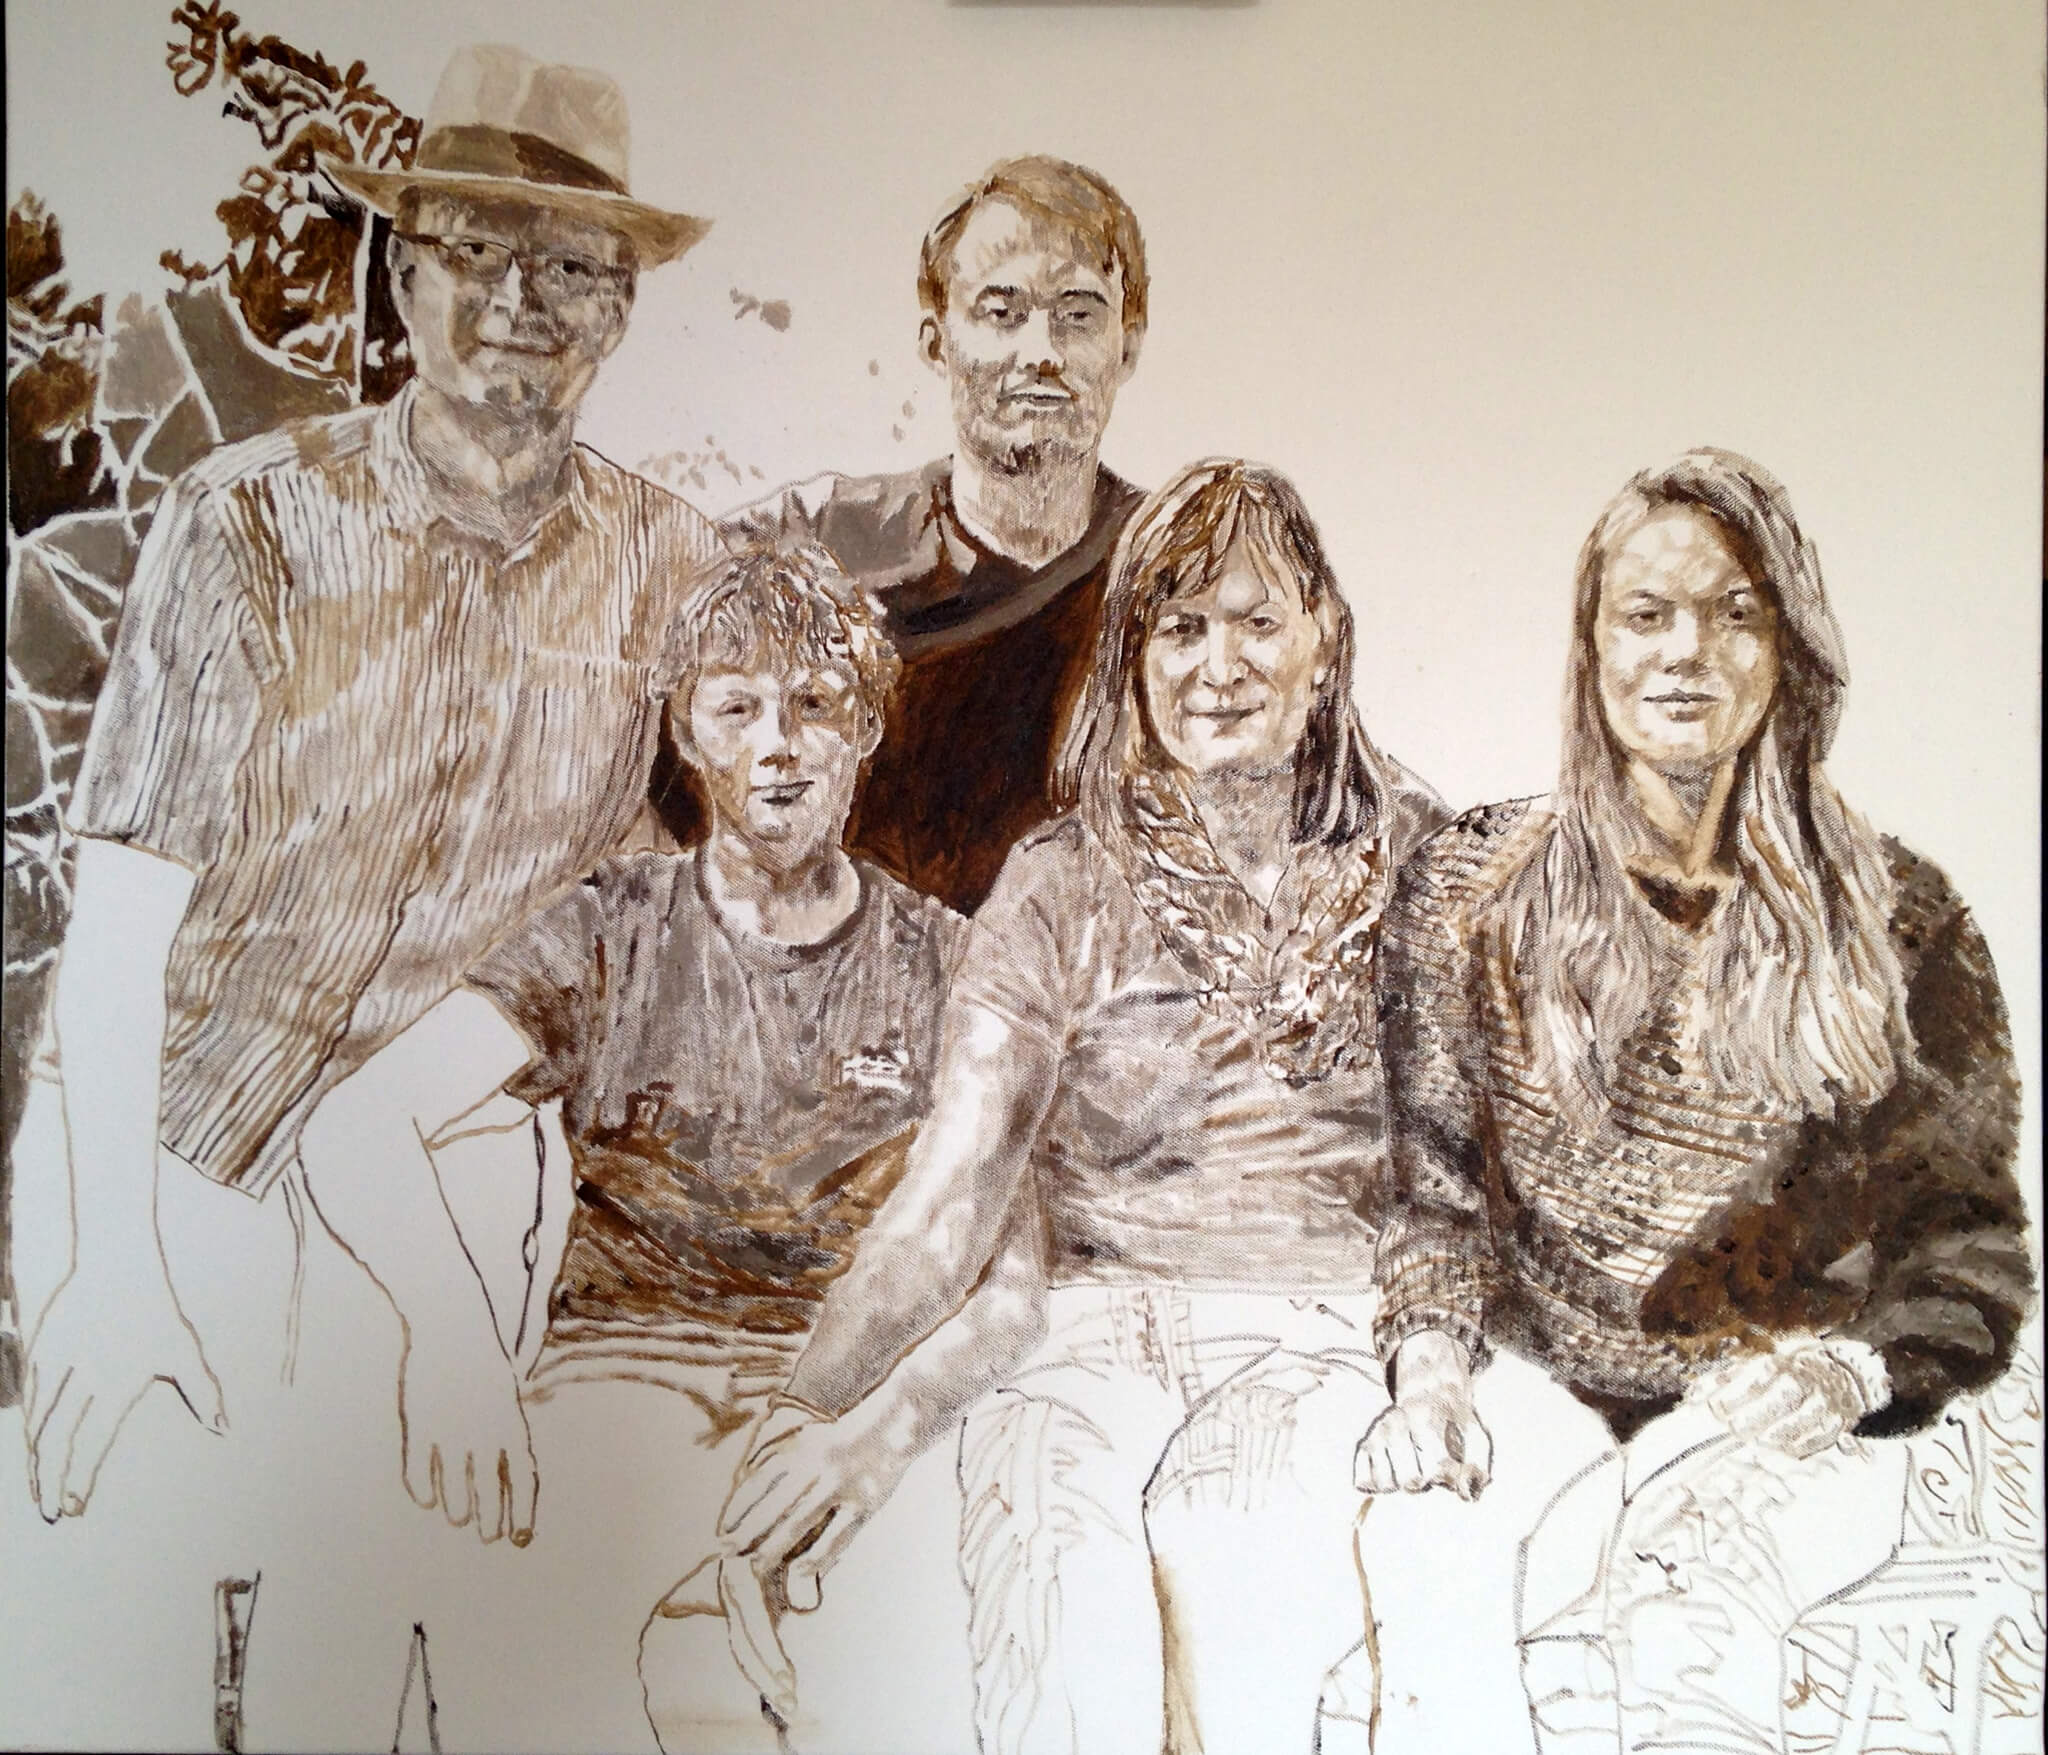 Artist Stella Tooth's family portrait commission in oils on canvas at stage of monochrome underpainting.